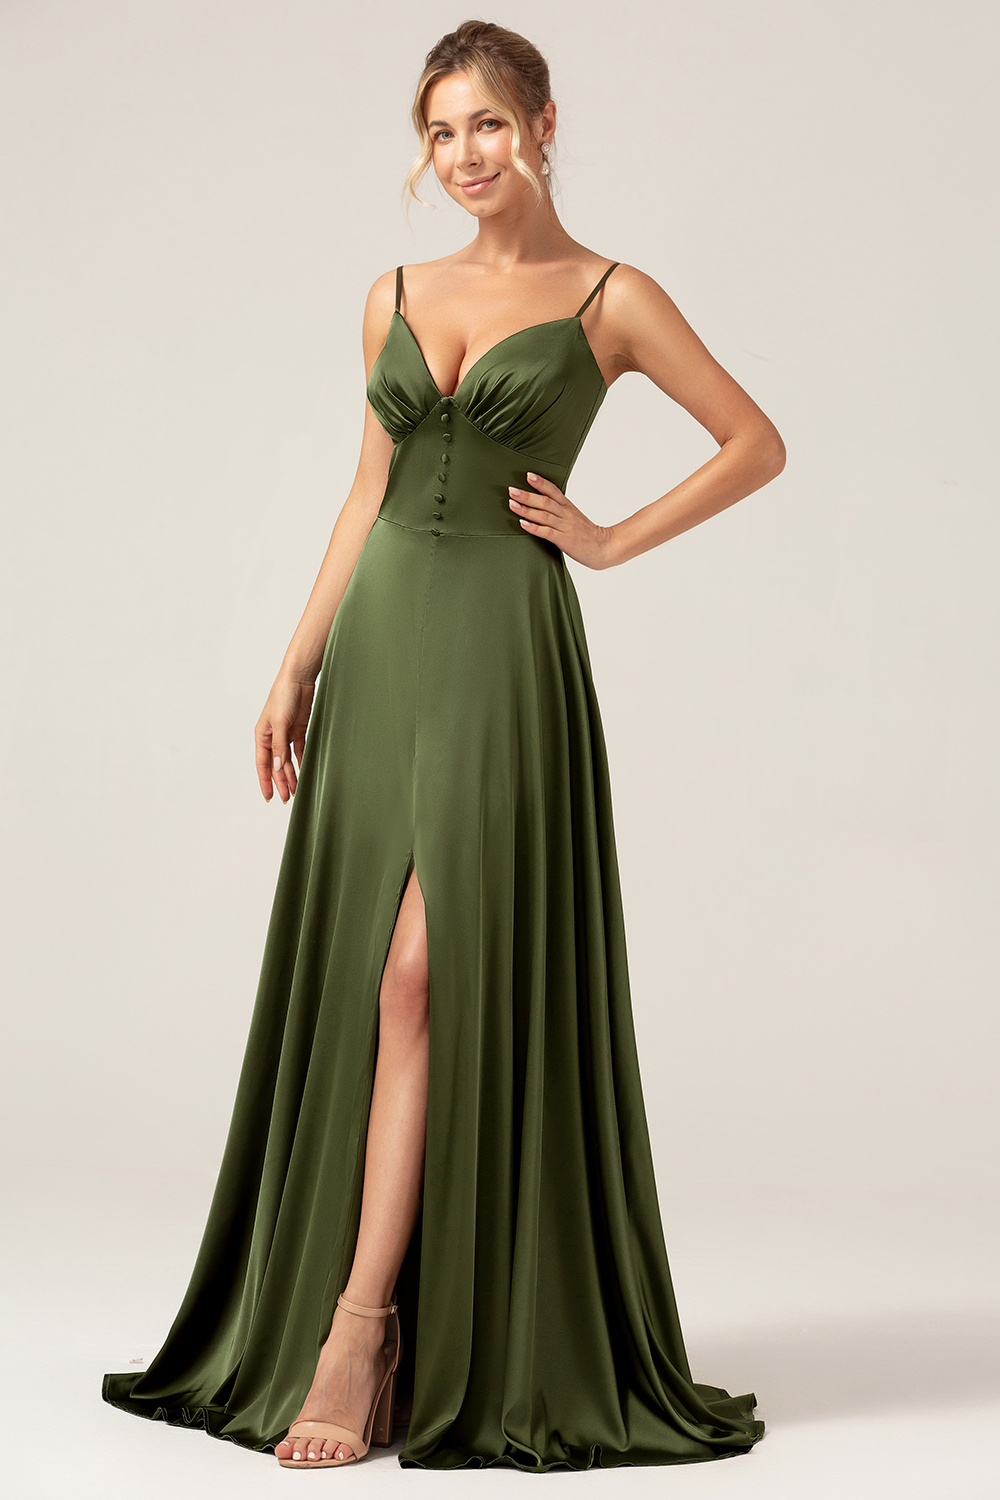 Olive A Line Spaghetti Straps Long Bridesmaid Dress with Slit